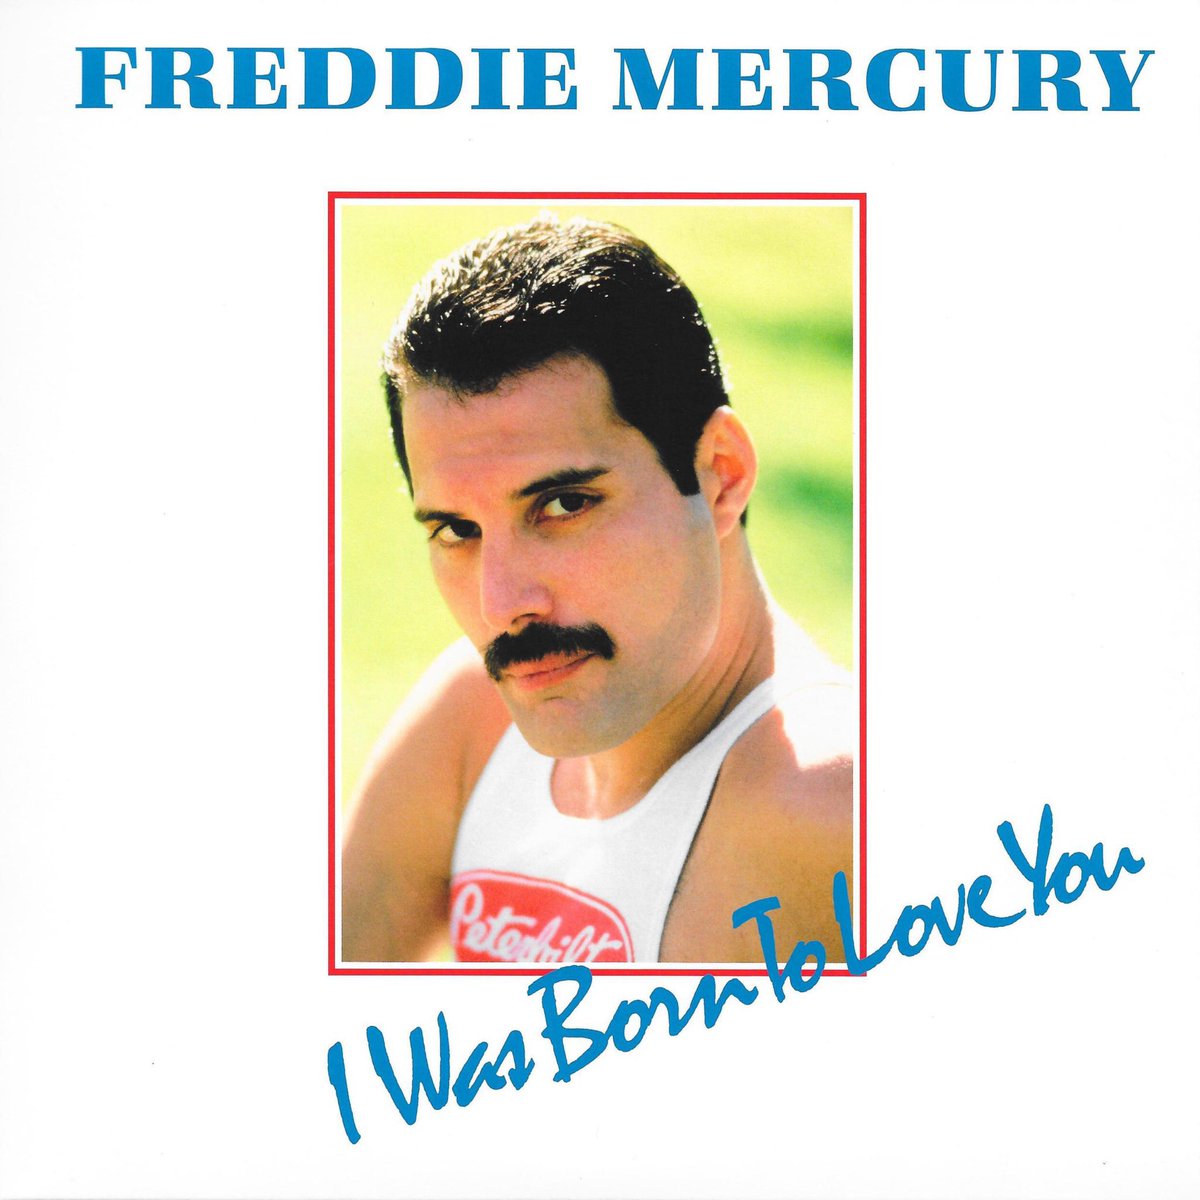 #OTD on 09/04/1985. #FreddieMercury released the song #IWasBornToLoveYou, as 1st extract from him 1st solo studio album, #MrBadGuy.